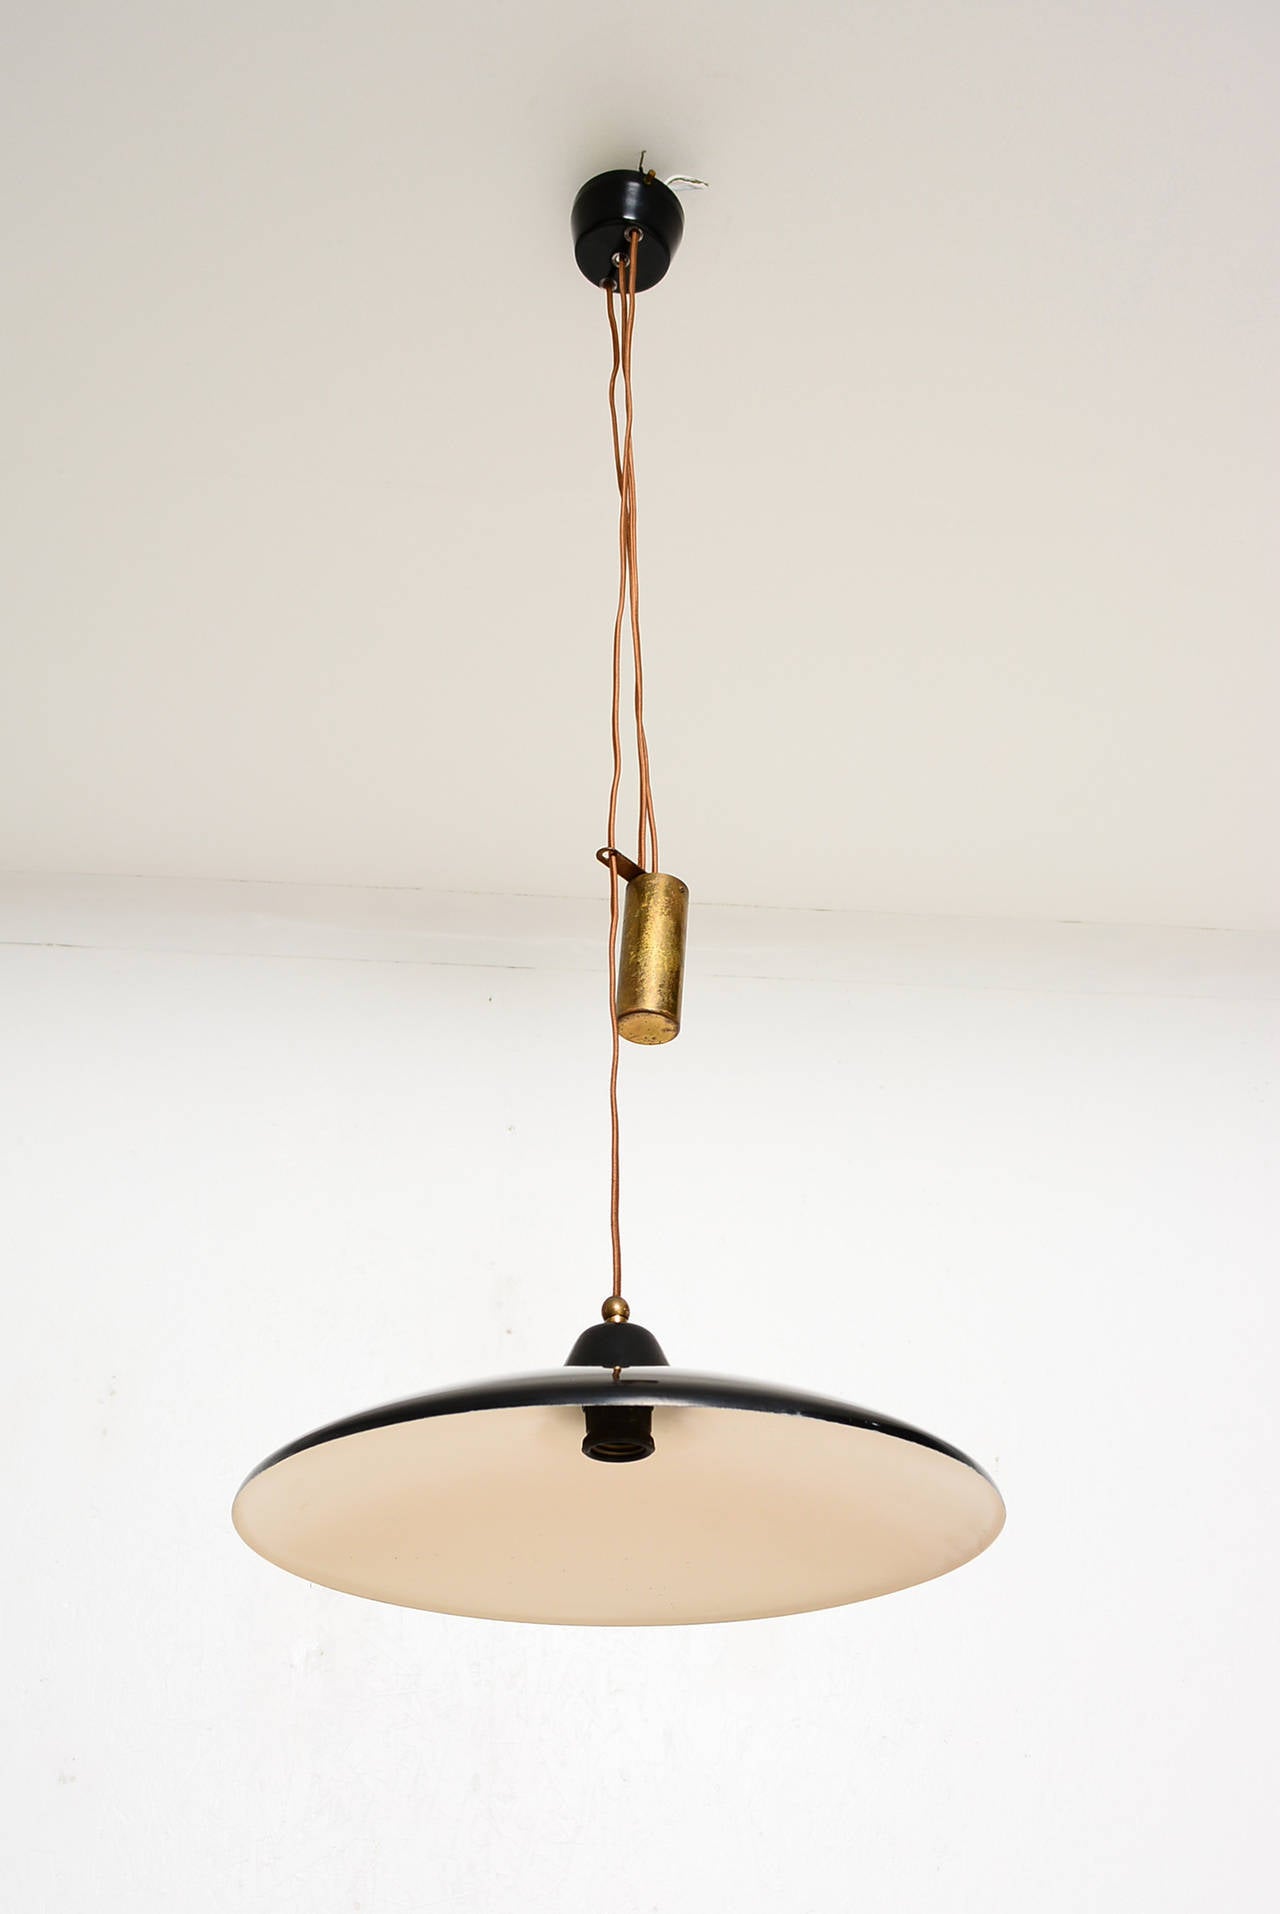 For your consideration an Italian hanging light fixture. 

Sculptural shape made of spun aluminum. Black satin finish with brass hardware. 

Heavy counterbalance weight helps to adjust the height of the light as desired. 

No bulb included.